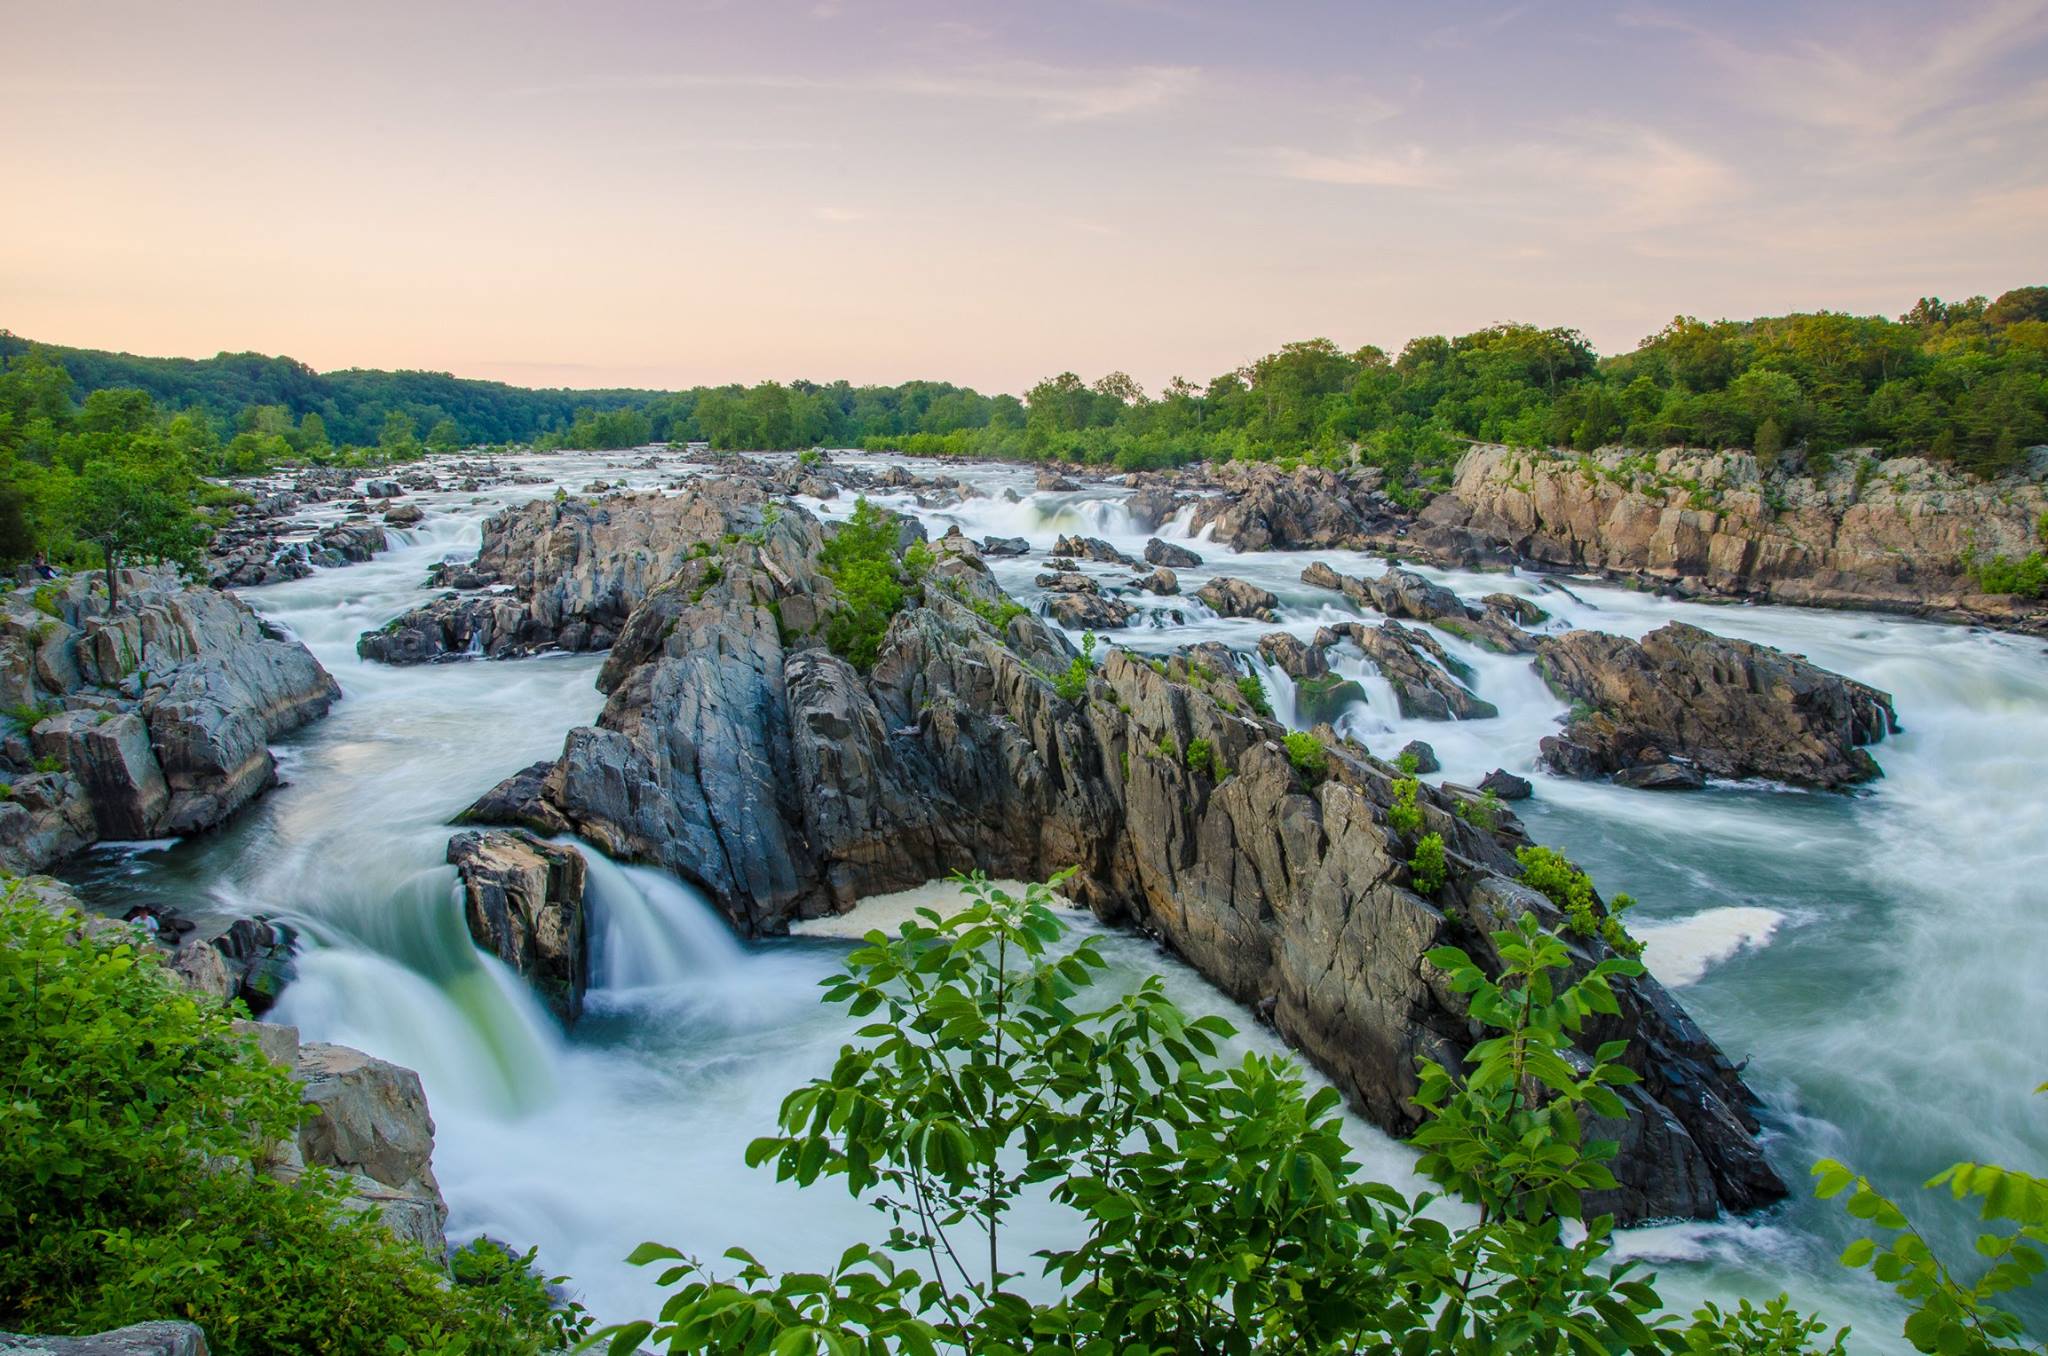 Rushing water spills over the waterfalls at Great Falls Park in Virginia.